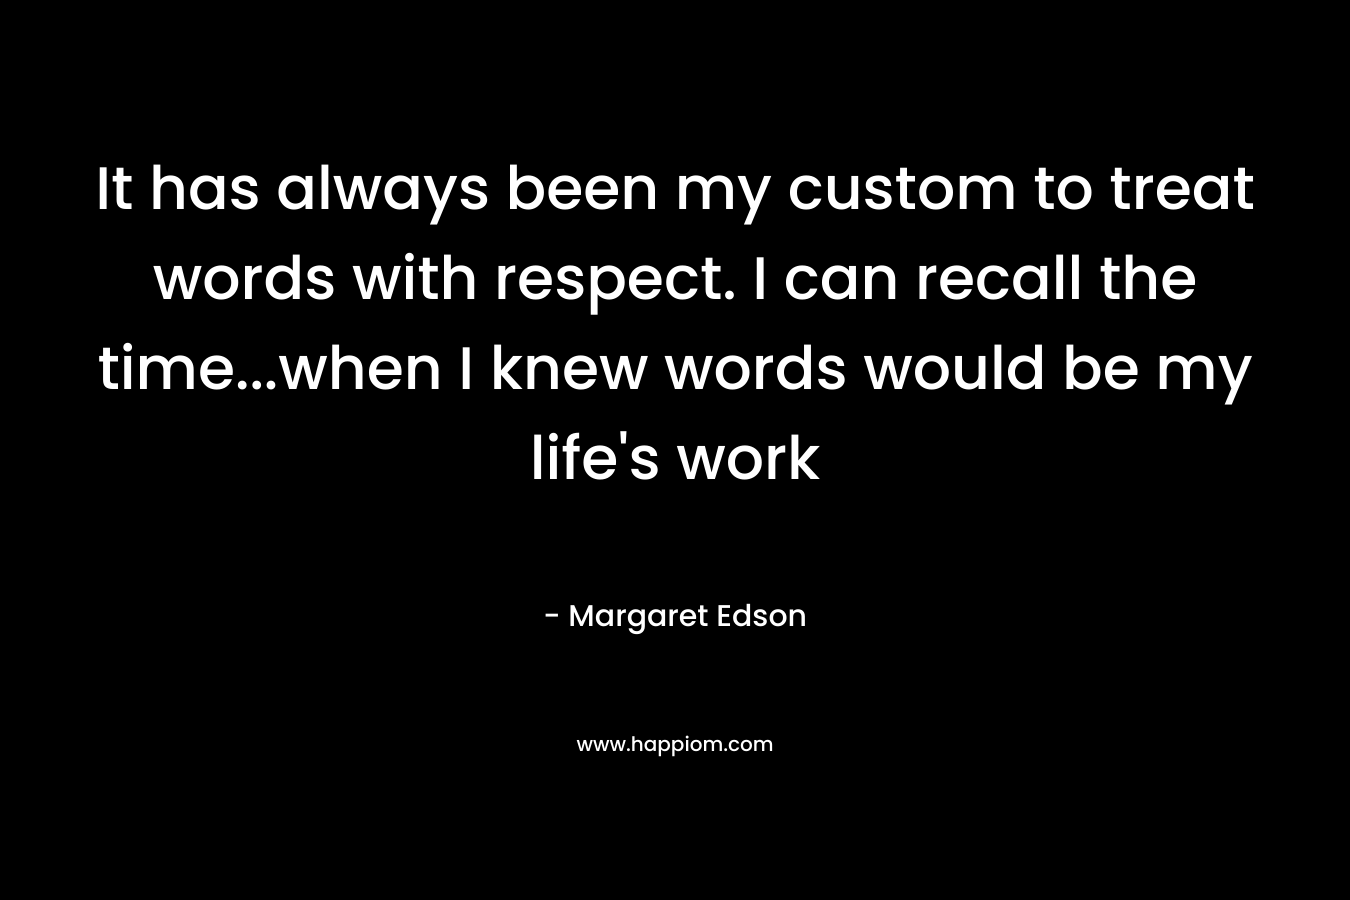 It has always been my custom to treat words with respect. I can recall the time...when I knew words would be my life's work